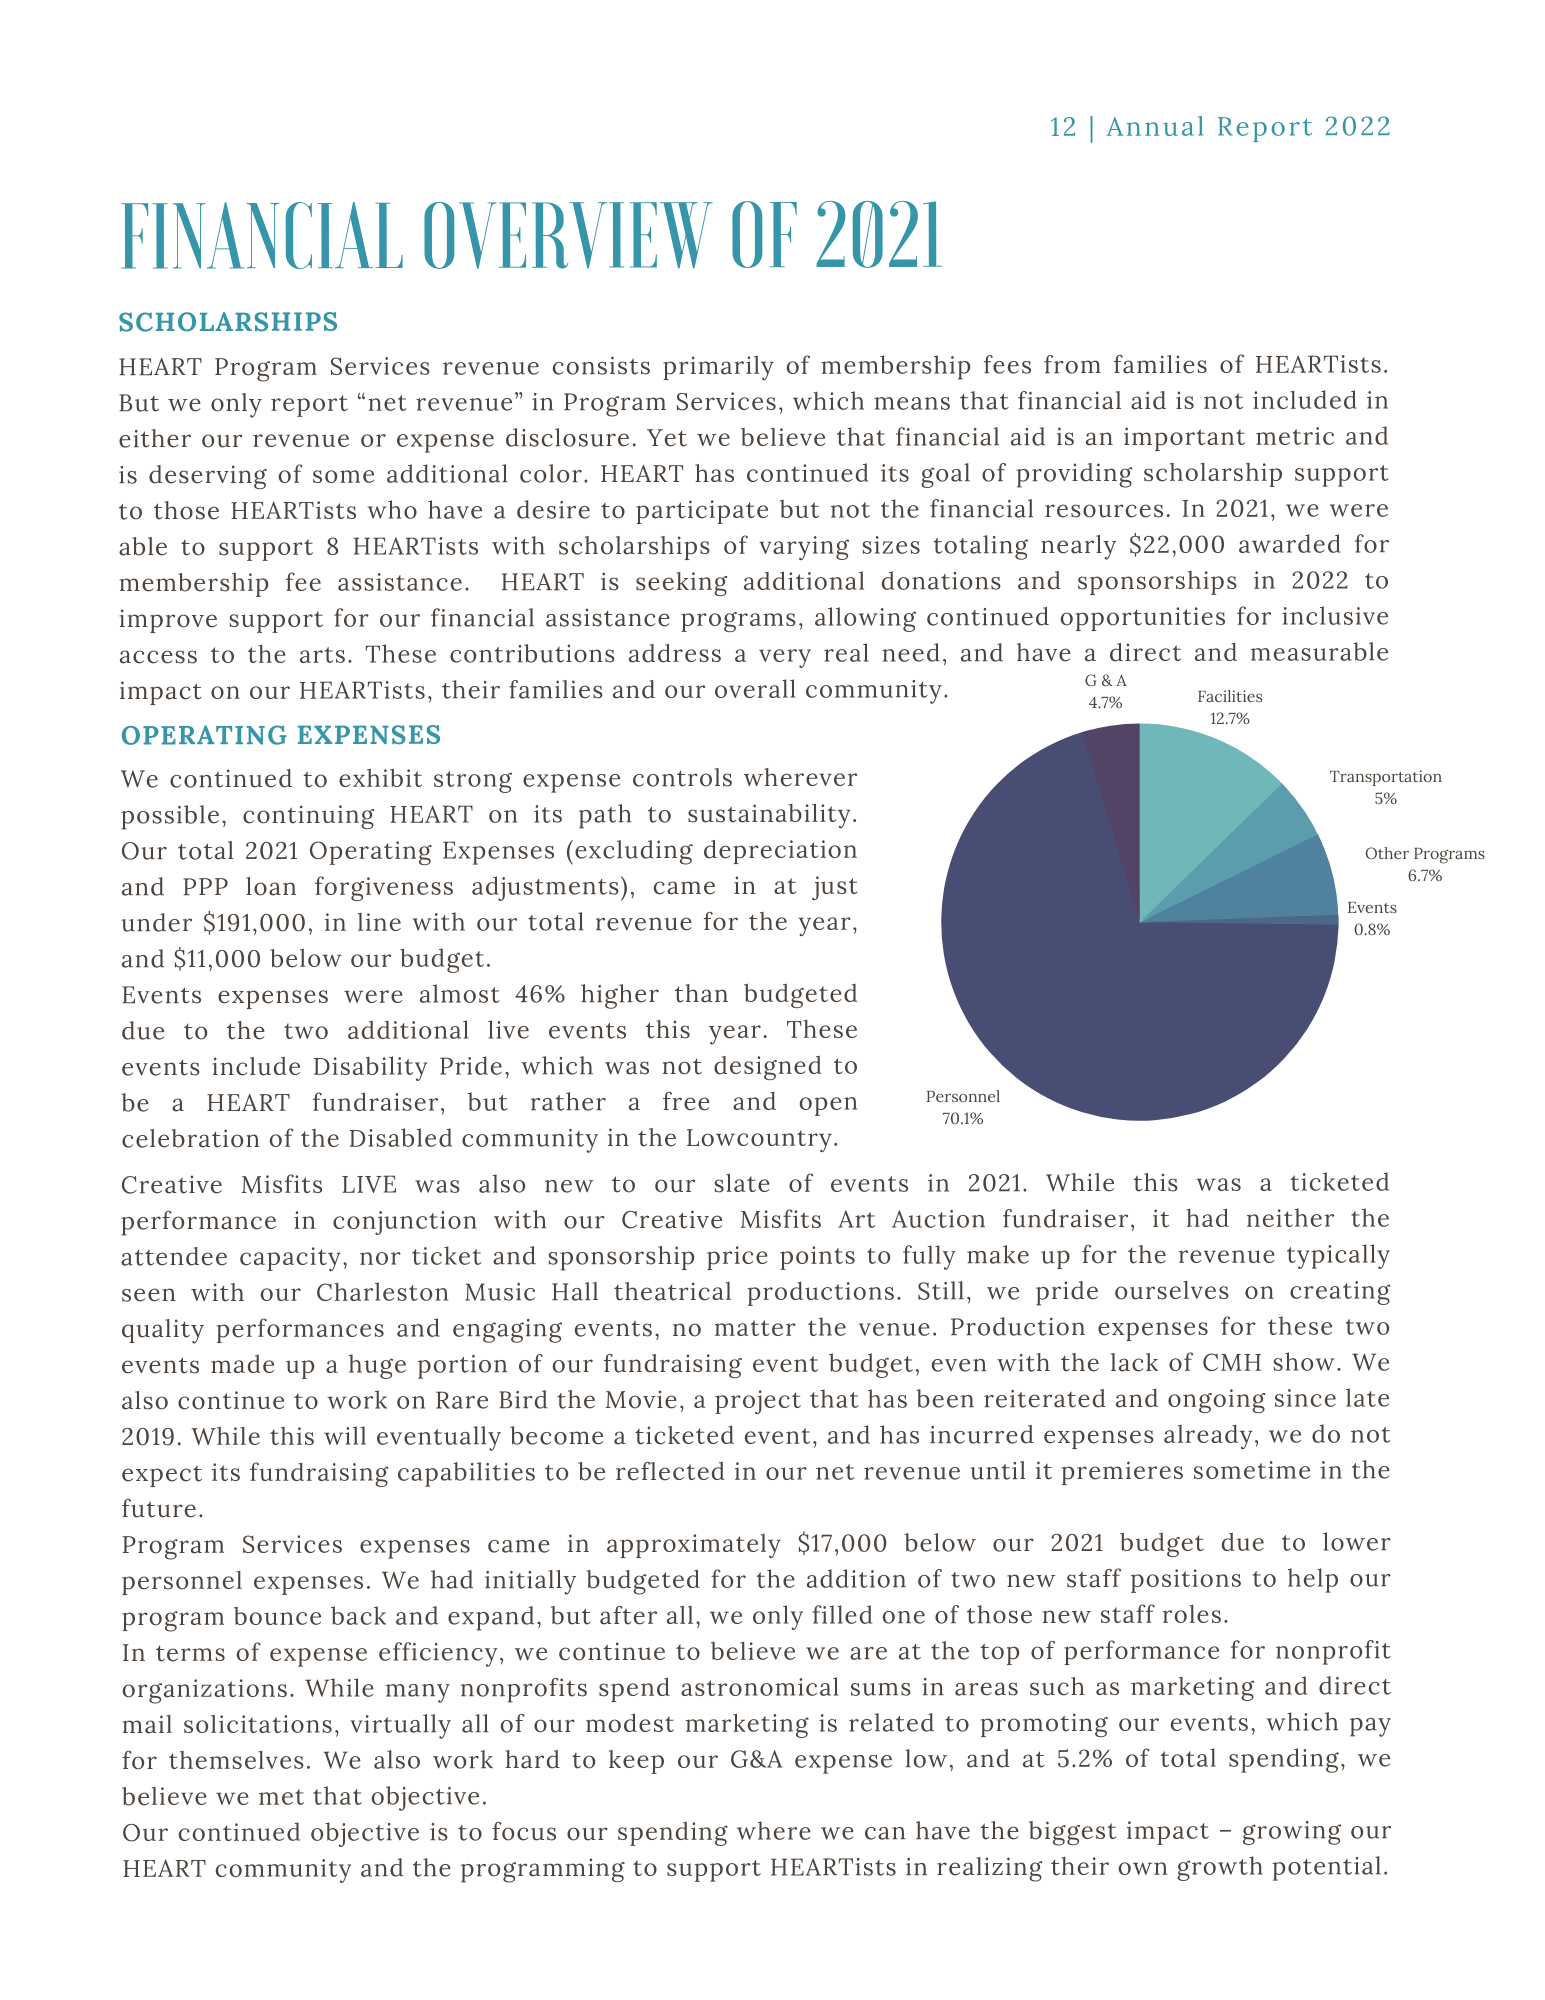 Financial Overview of 2021 (Continued)